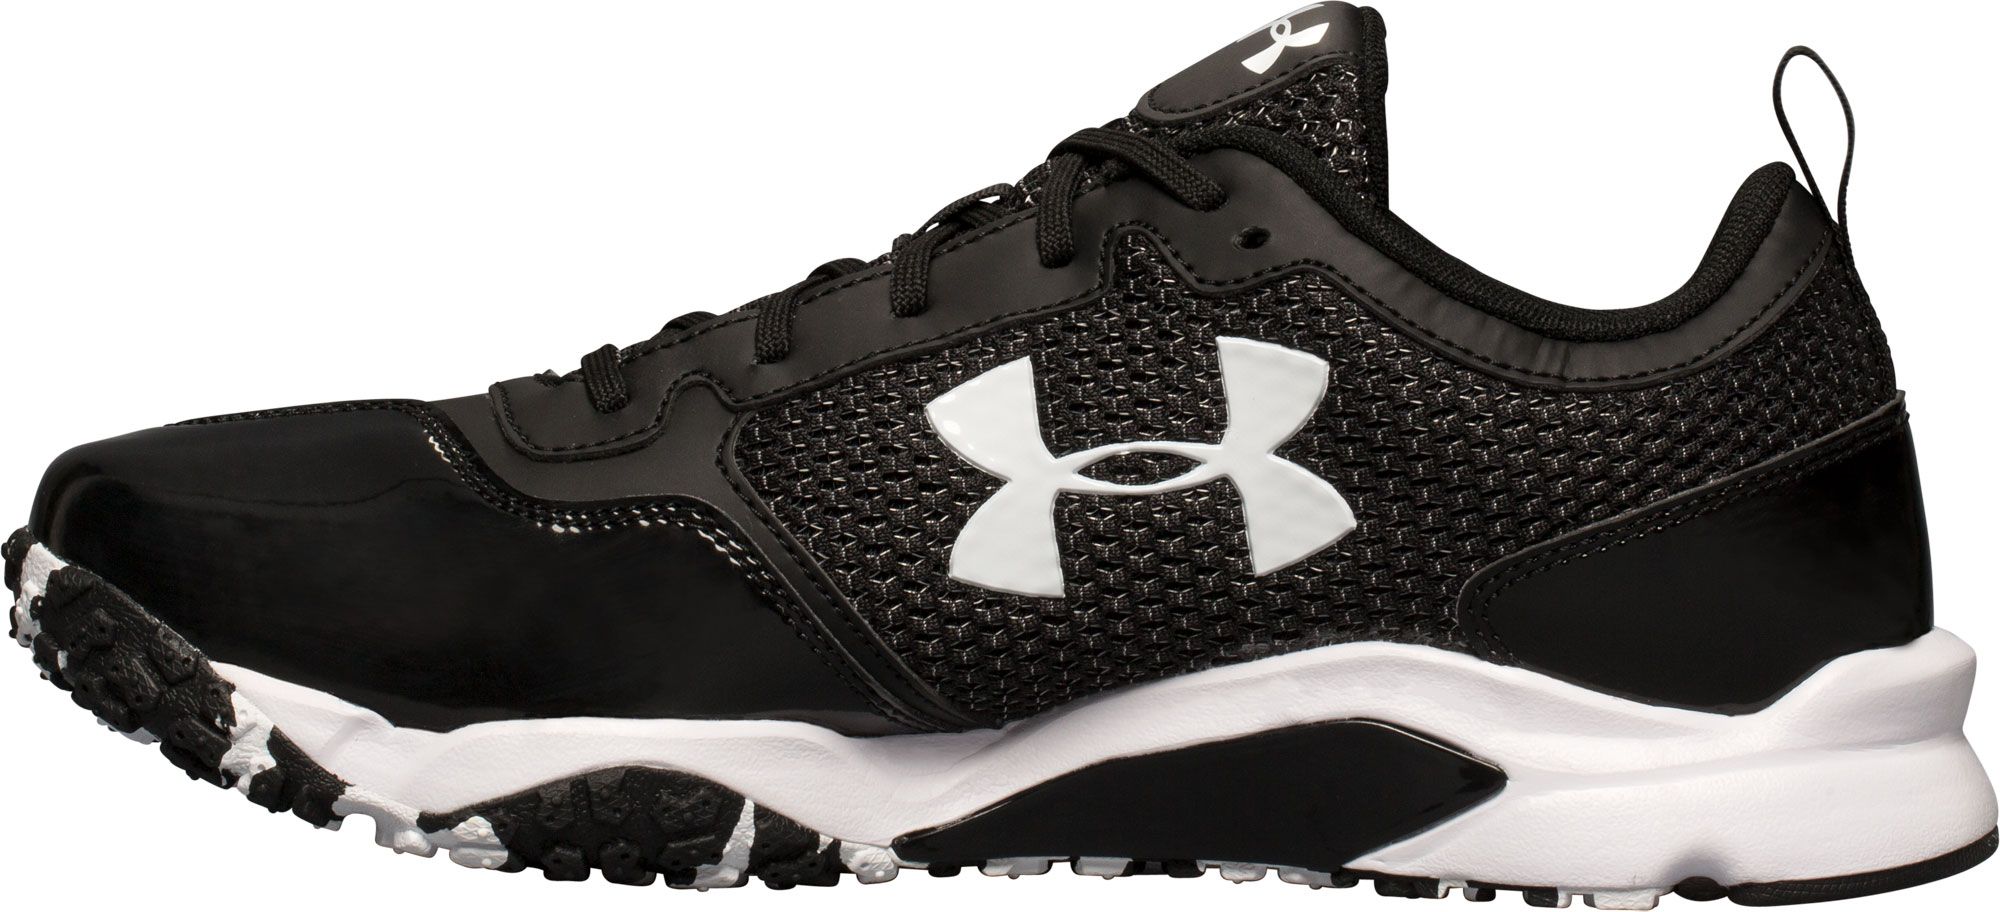 Under Armour Mens Ultimate Turf Trainer 